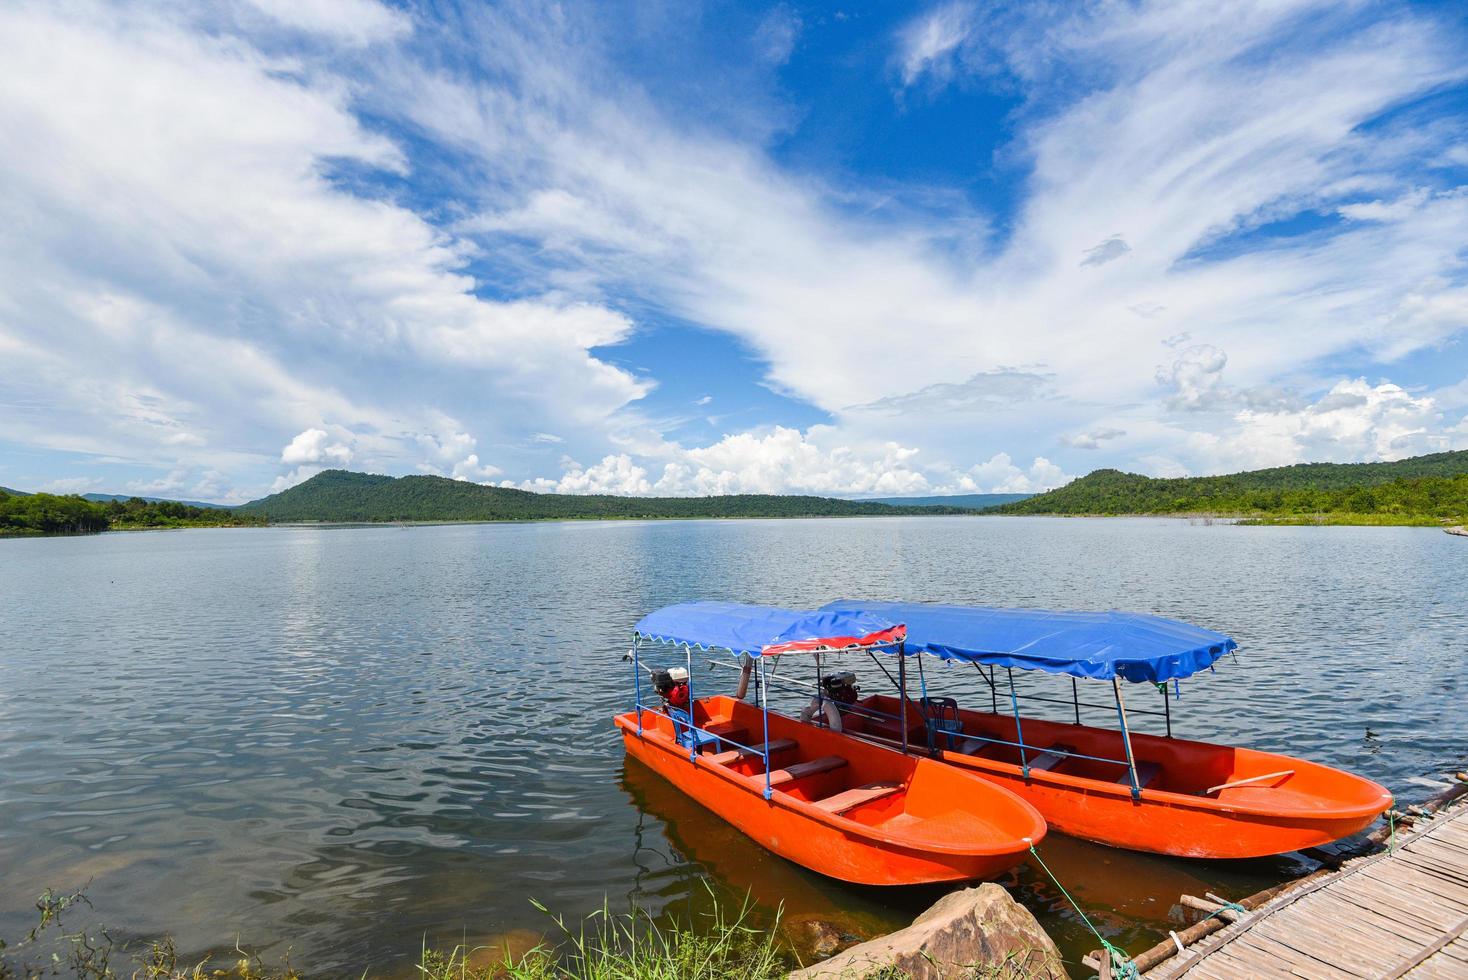 Small fisher boats at the harbour in iver water in thailand blue sky with clouds beautiful and island mountain background landscape - Plastic boat photo